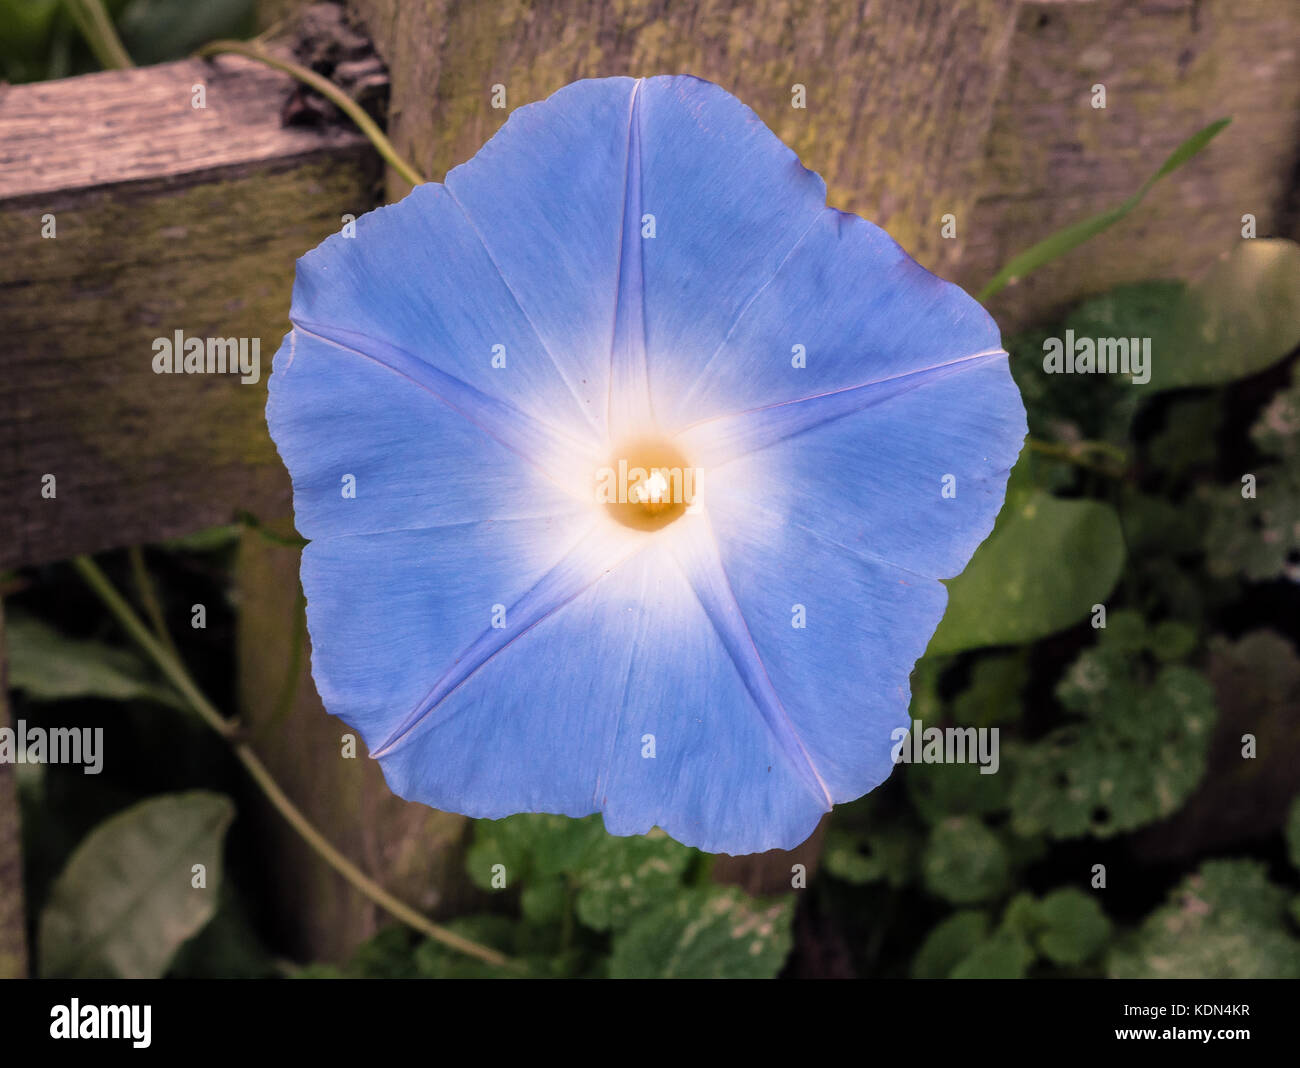 Single Ipomoea tricolor 'Heavenly Blue' morning glory on ground view from above Stock Photo